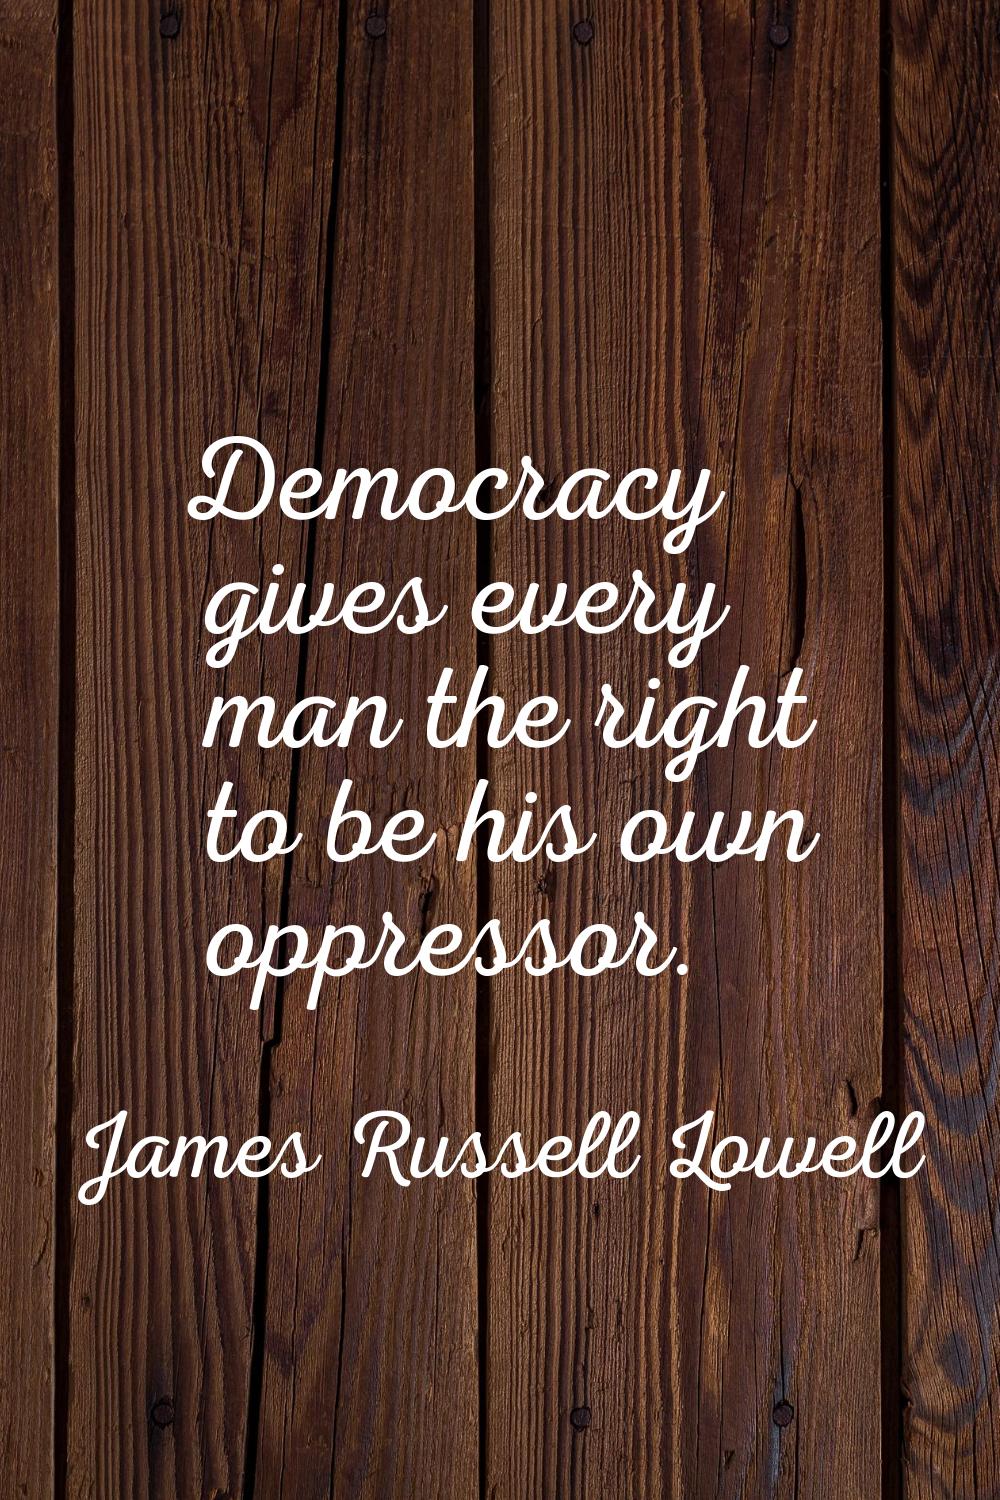 Democracy gives every man the right to be his own oppressor.